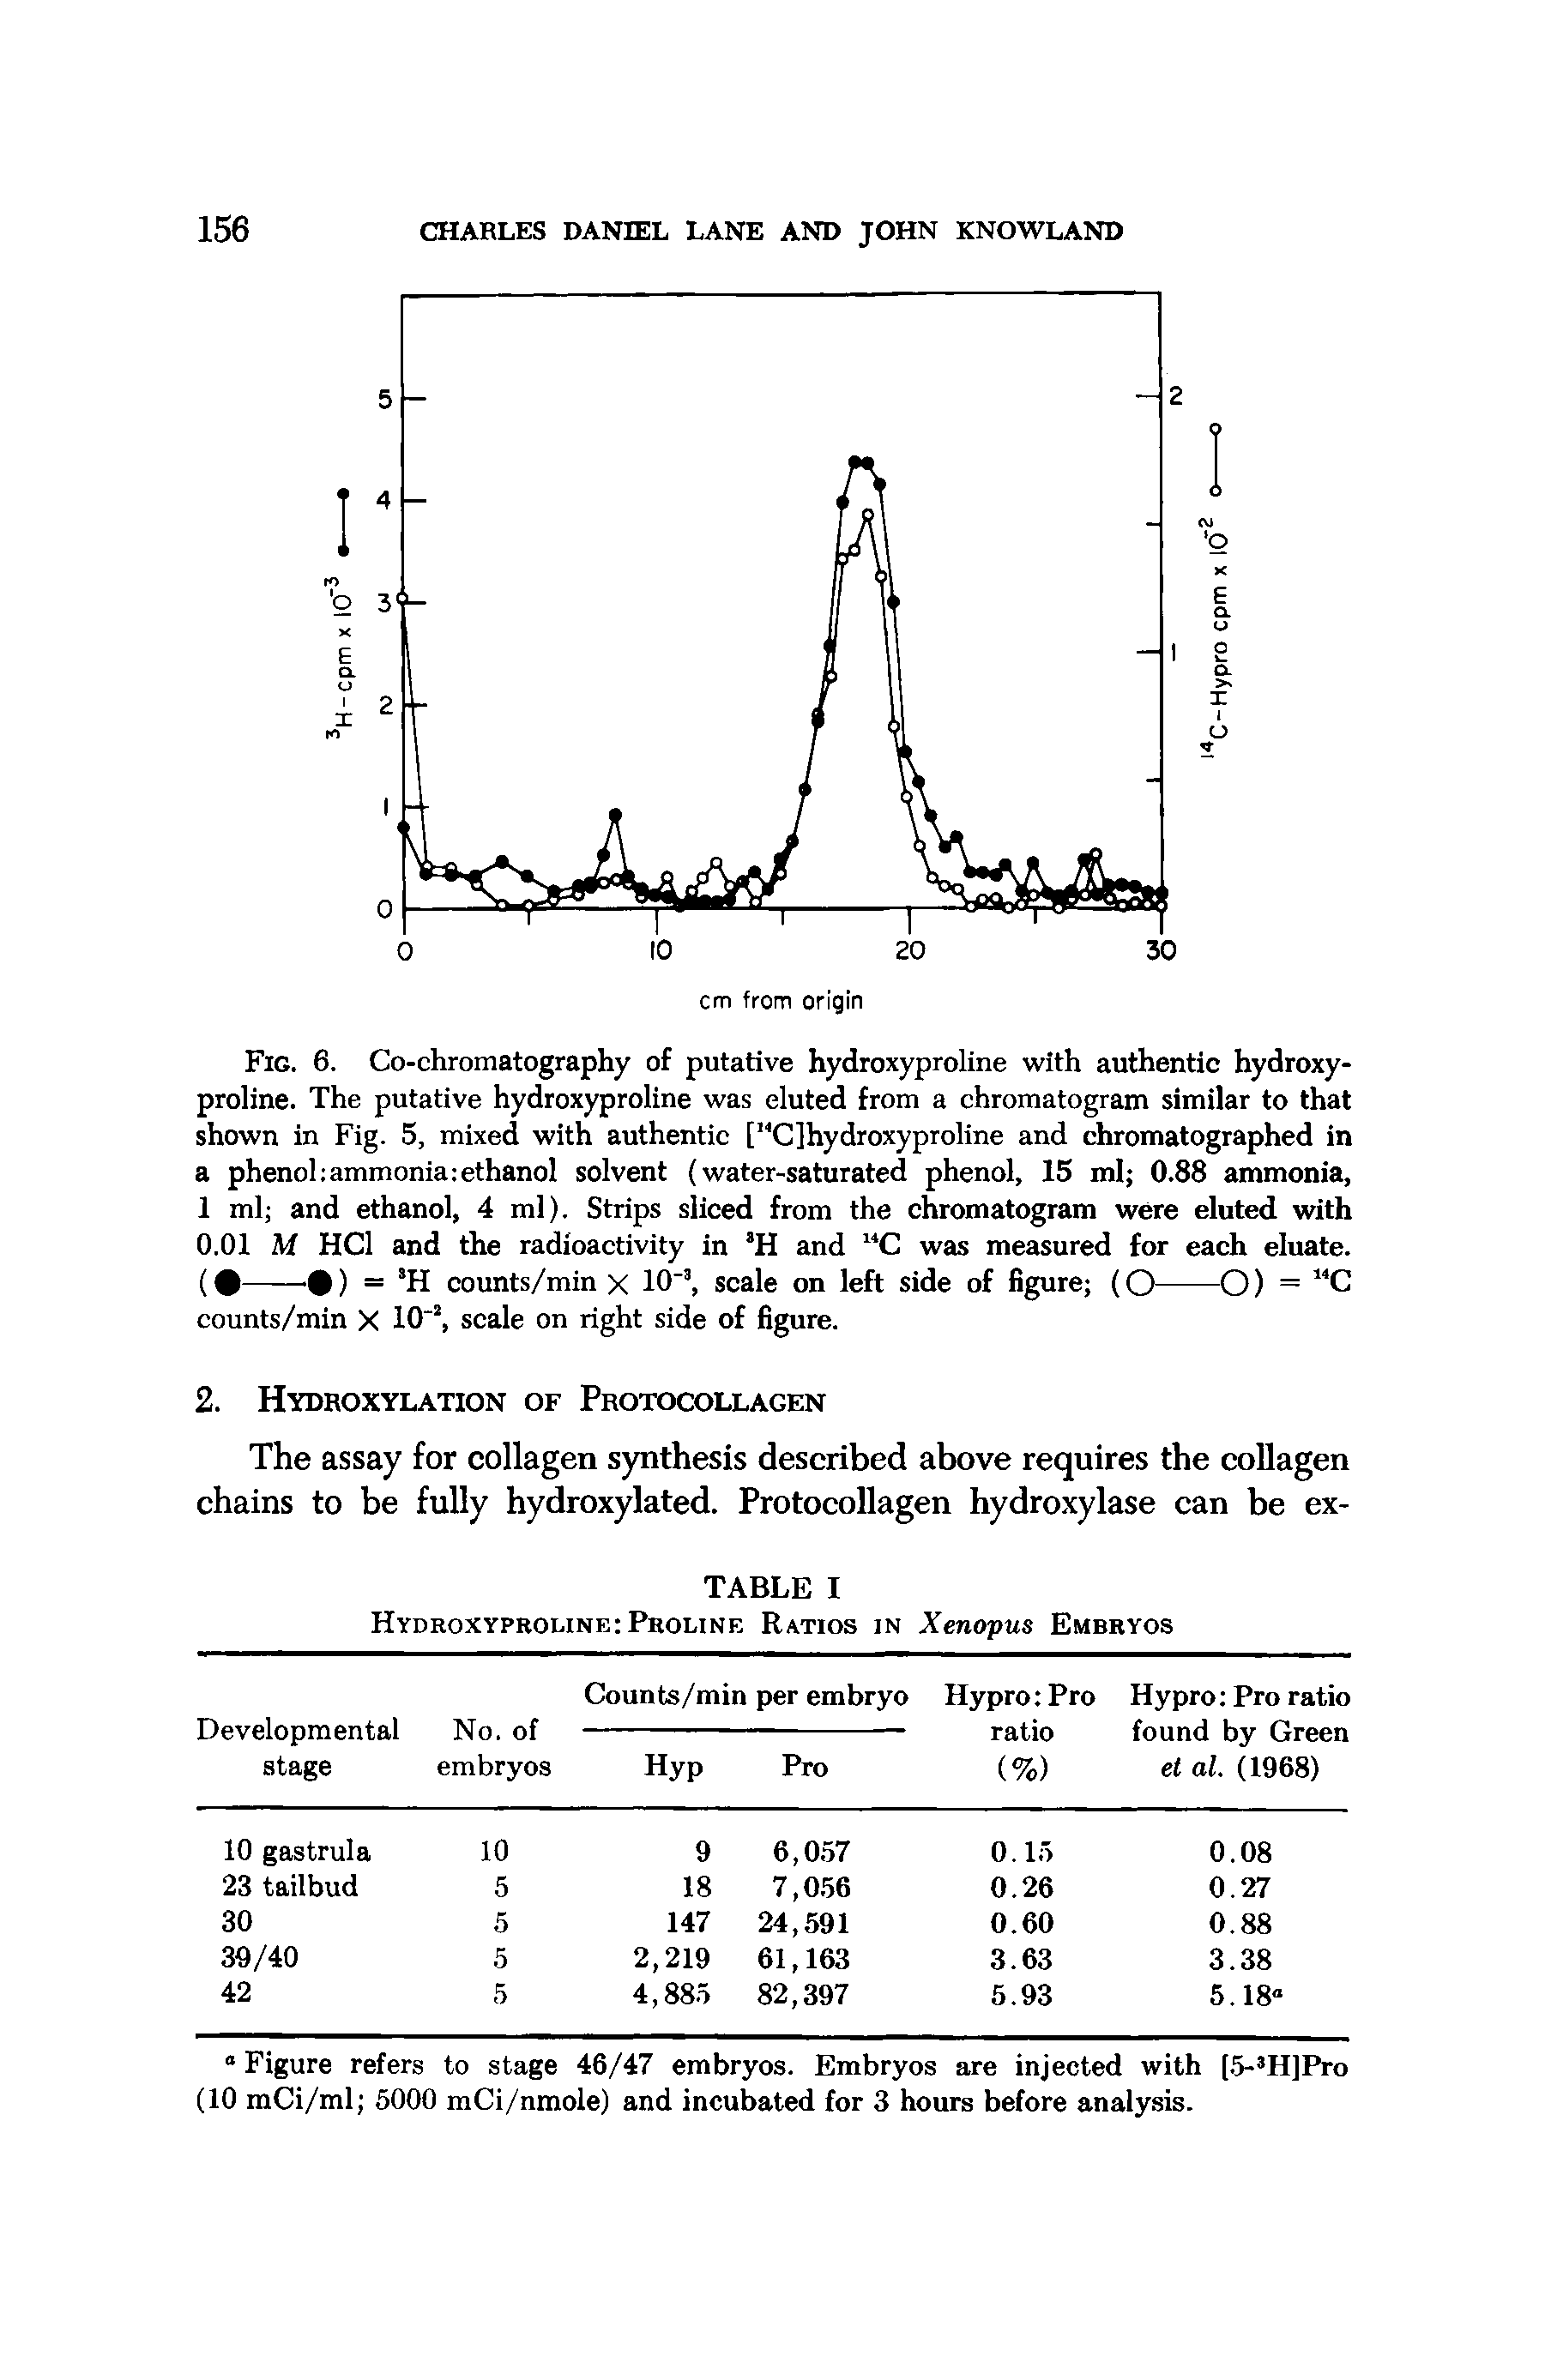 Fig. 6. Co-chromatography of putative hydroxyproline with authentic hydroxy-proline. The putative hydroxyproline was eluted from a chromatogram similar to that shown in Fig. 5, mixed with authentic [ C]hydroxyproline and chromatographed in a phenol ammonia ethanol solvent (water-saturated phenol, 15 ml 0.88 ammonia, 1 ml and ethanol, 4 ml). Strips sliced from the chromatogram were eluted with 0.01 M HCl and the radioactivity in H and C was measured for each eluate.